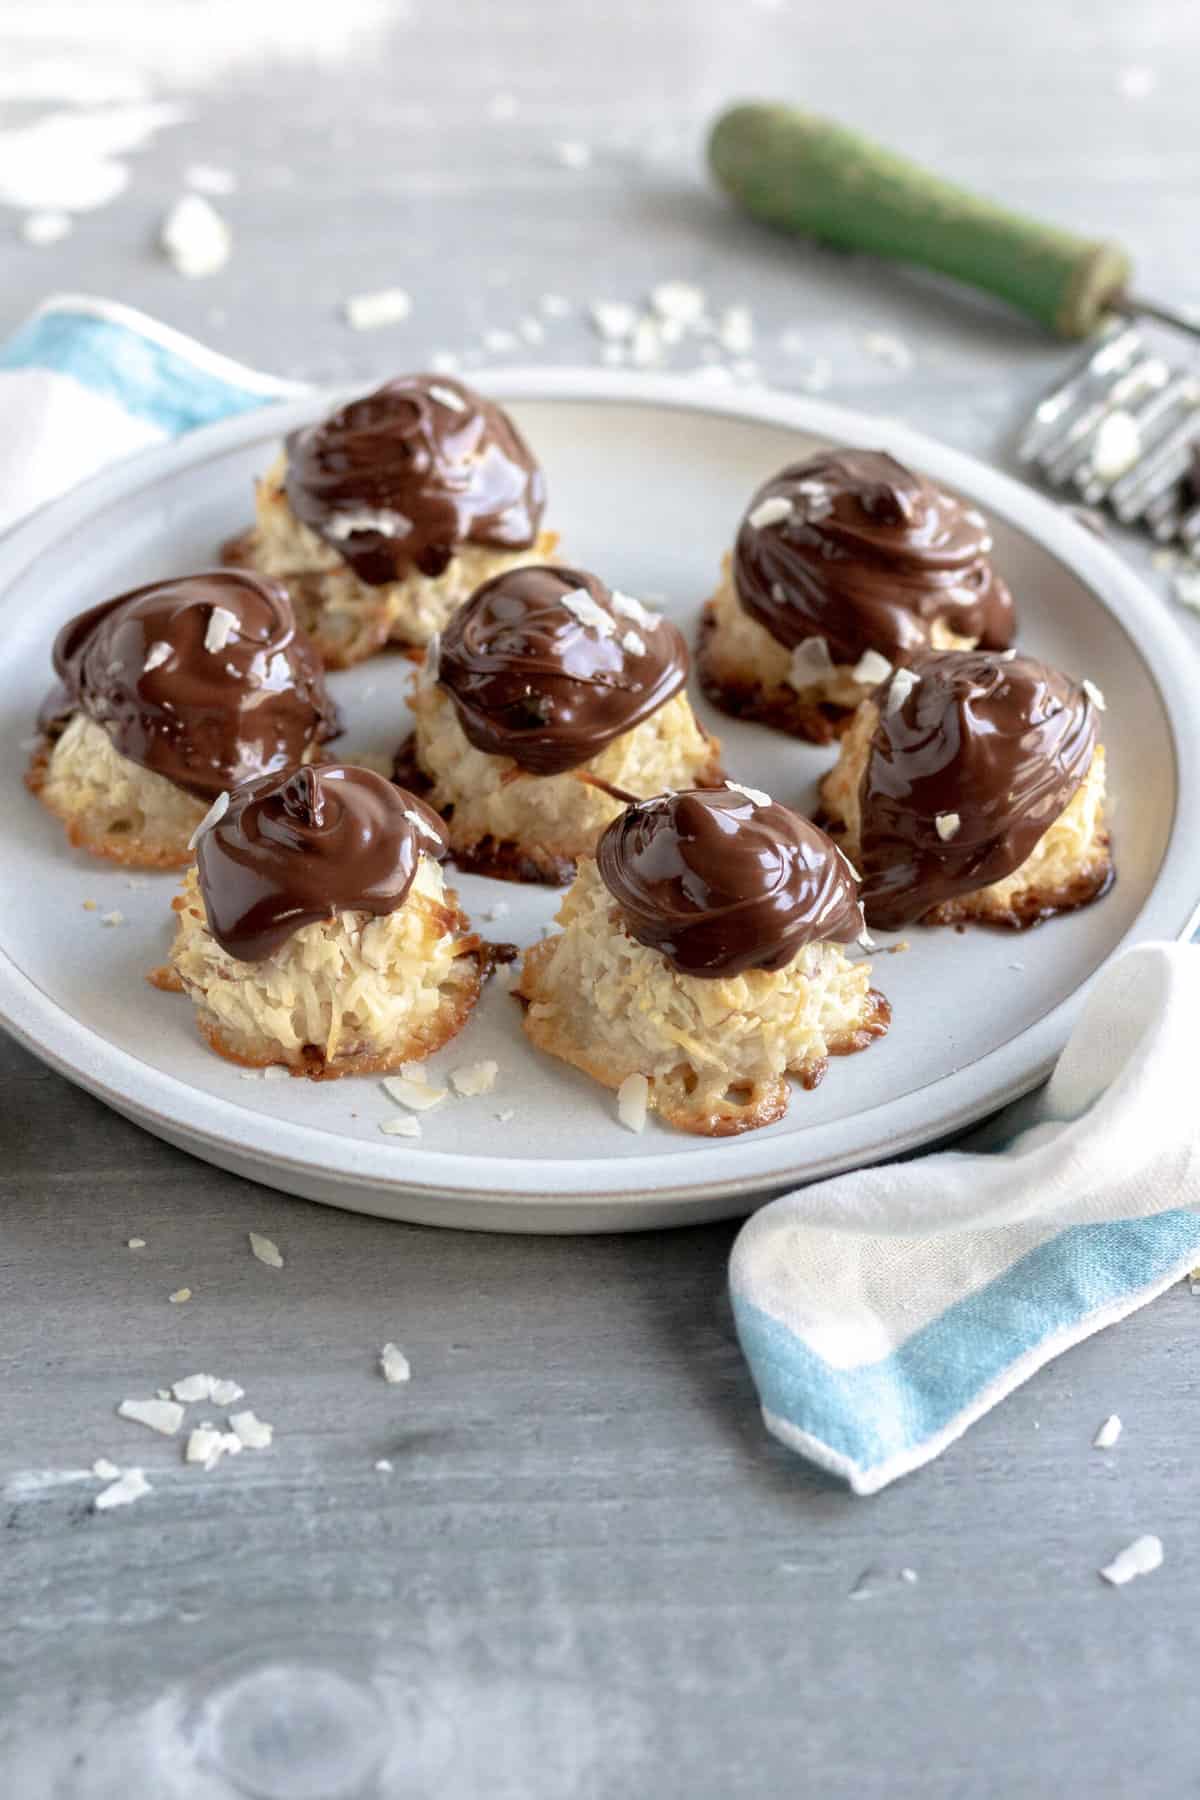 Macaroon candies with chocolate on top.